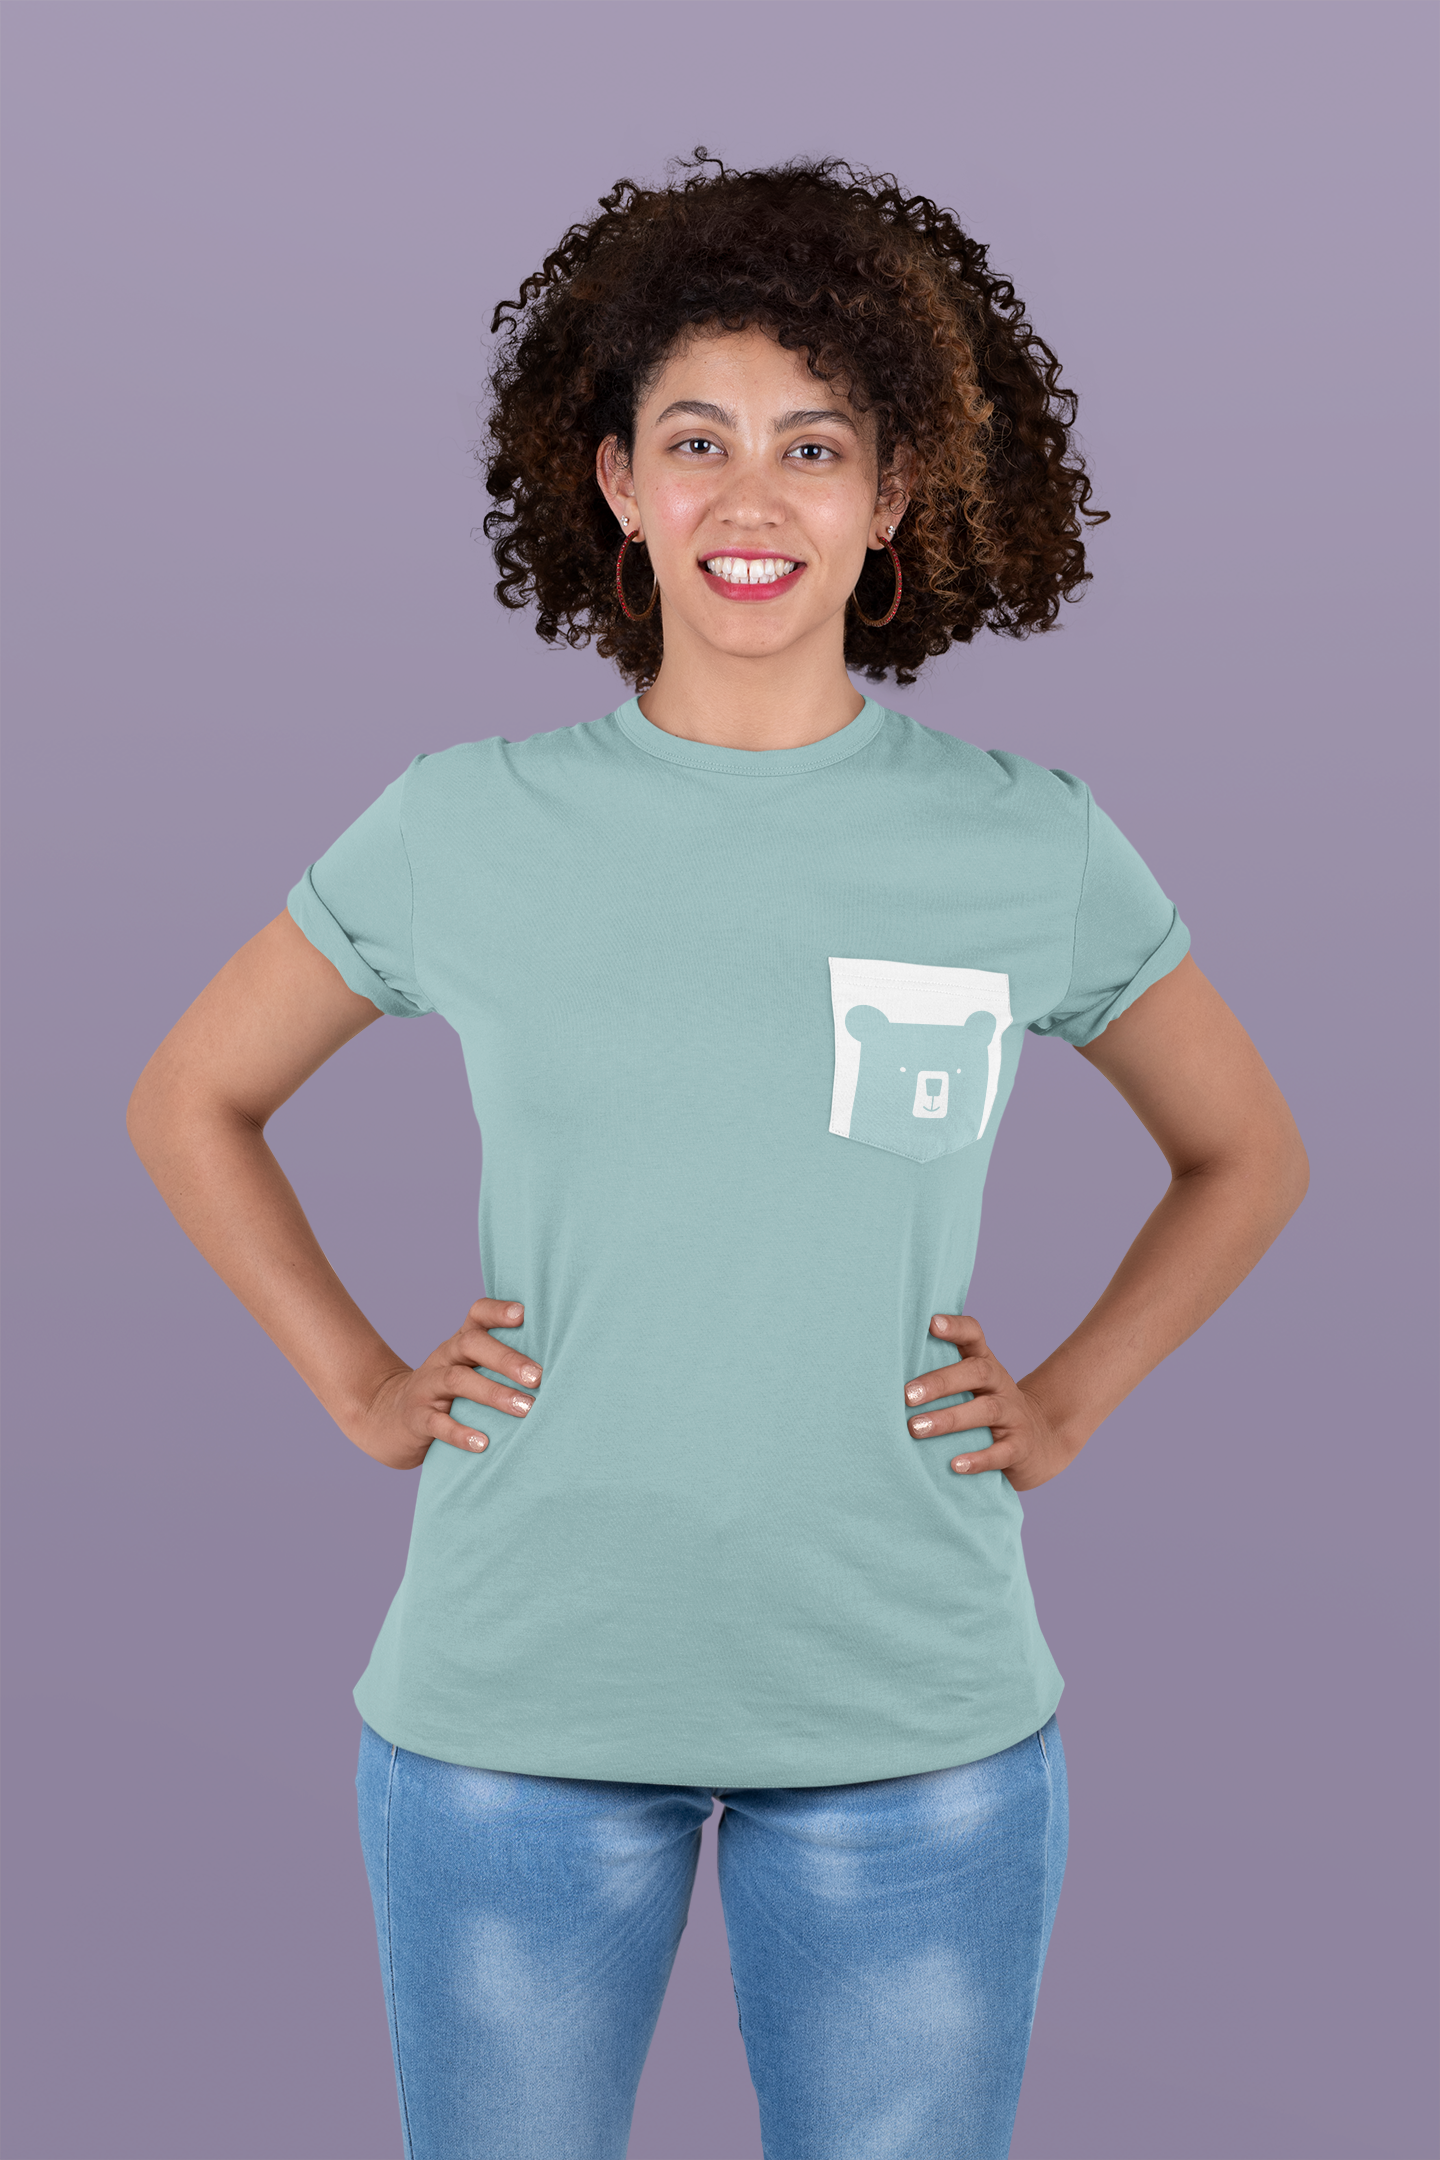 pocket-tee-mockup-of-a-woman-with-curly-hair-at-a-studio-30057-2.png